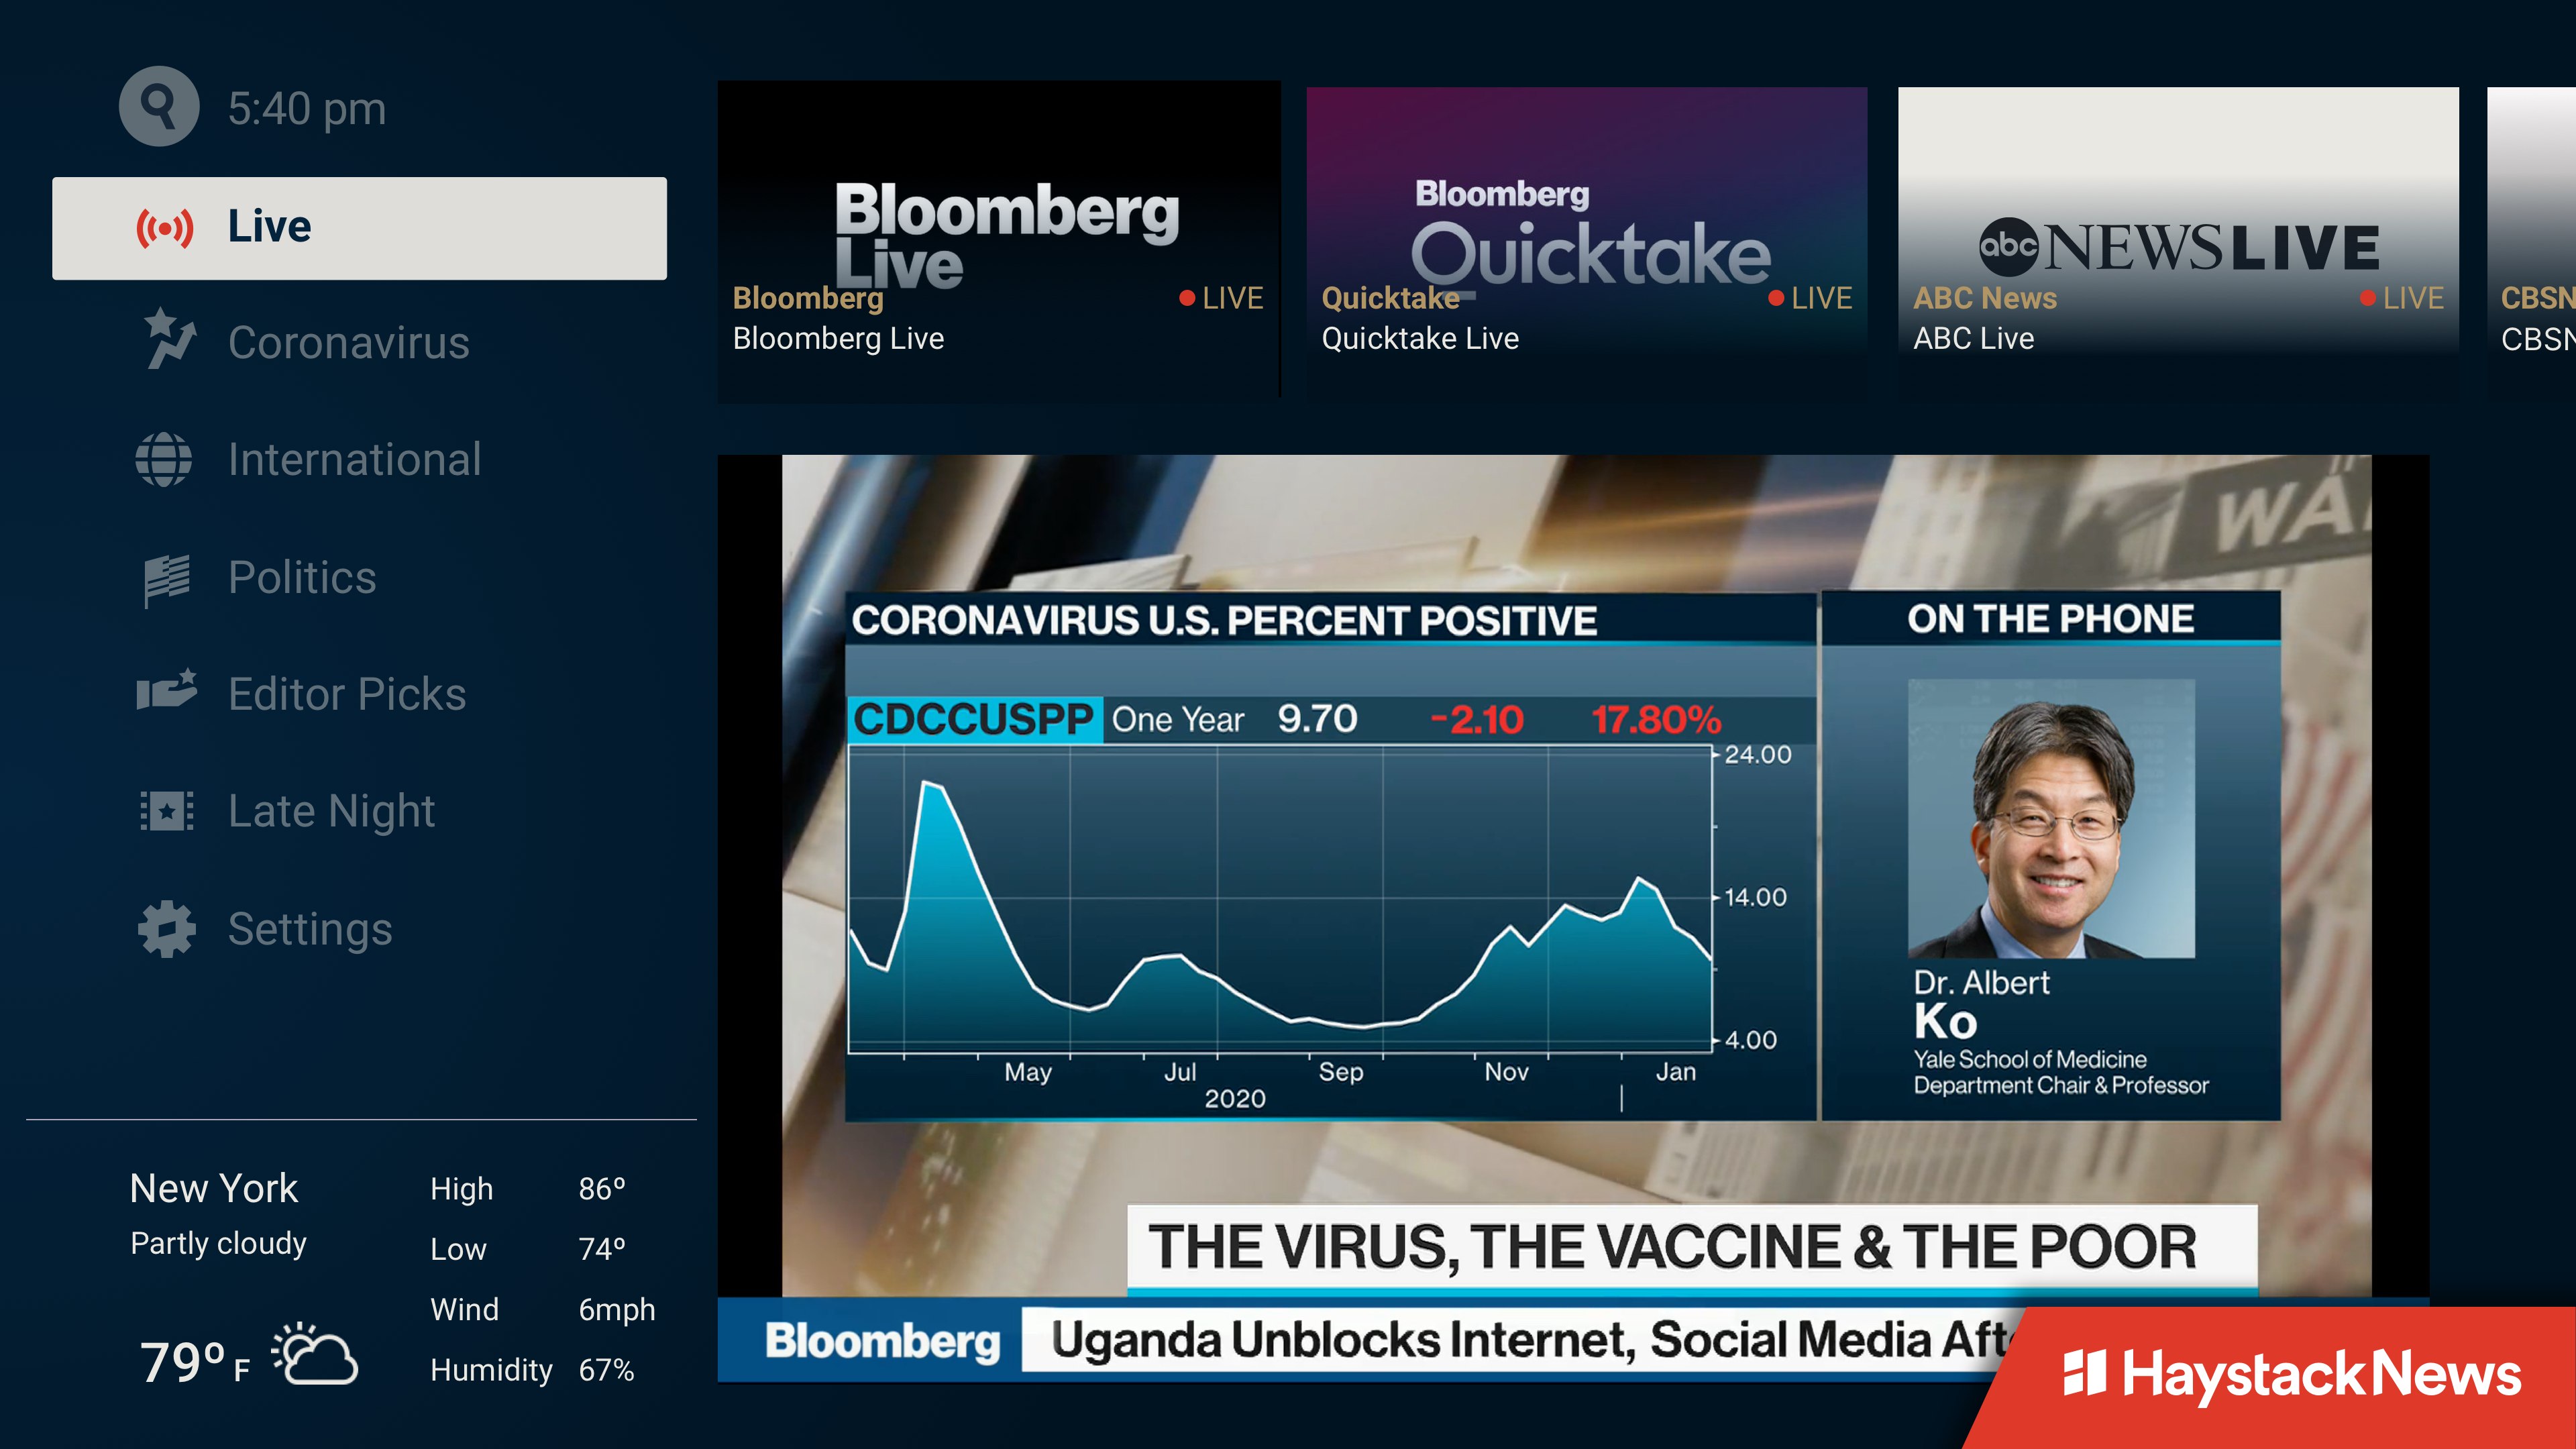 Haystack News Adds Bloomberg Channels to Its News Lineup